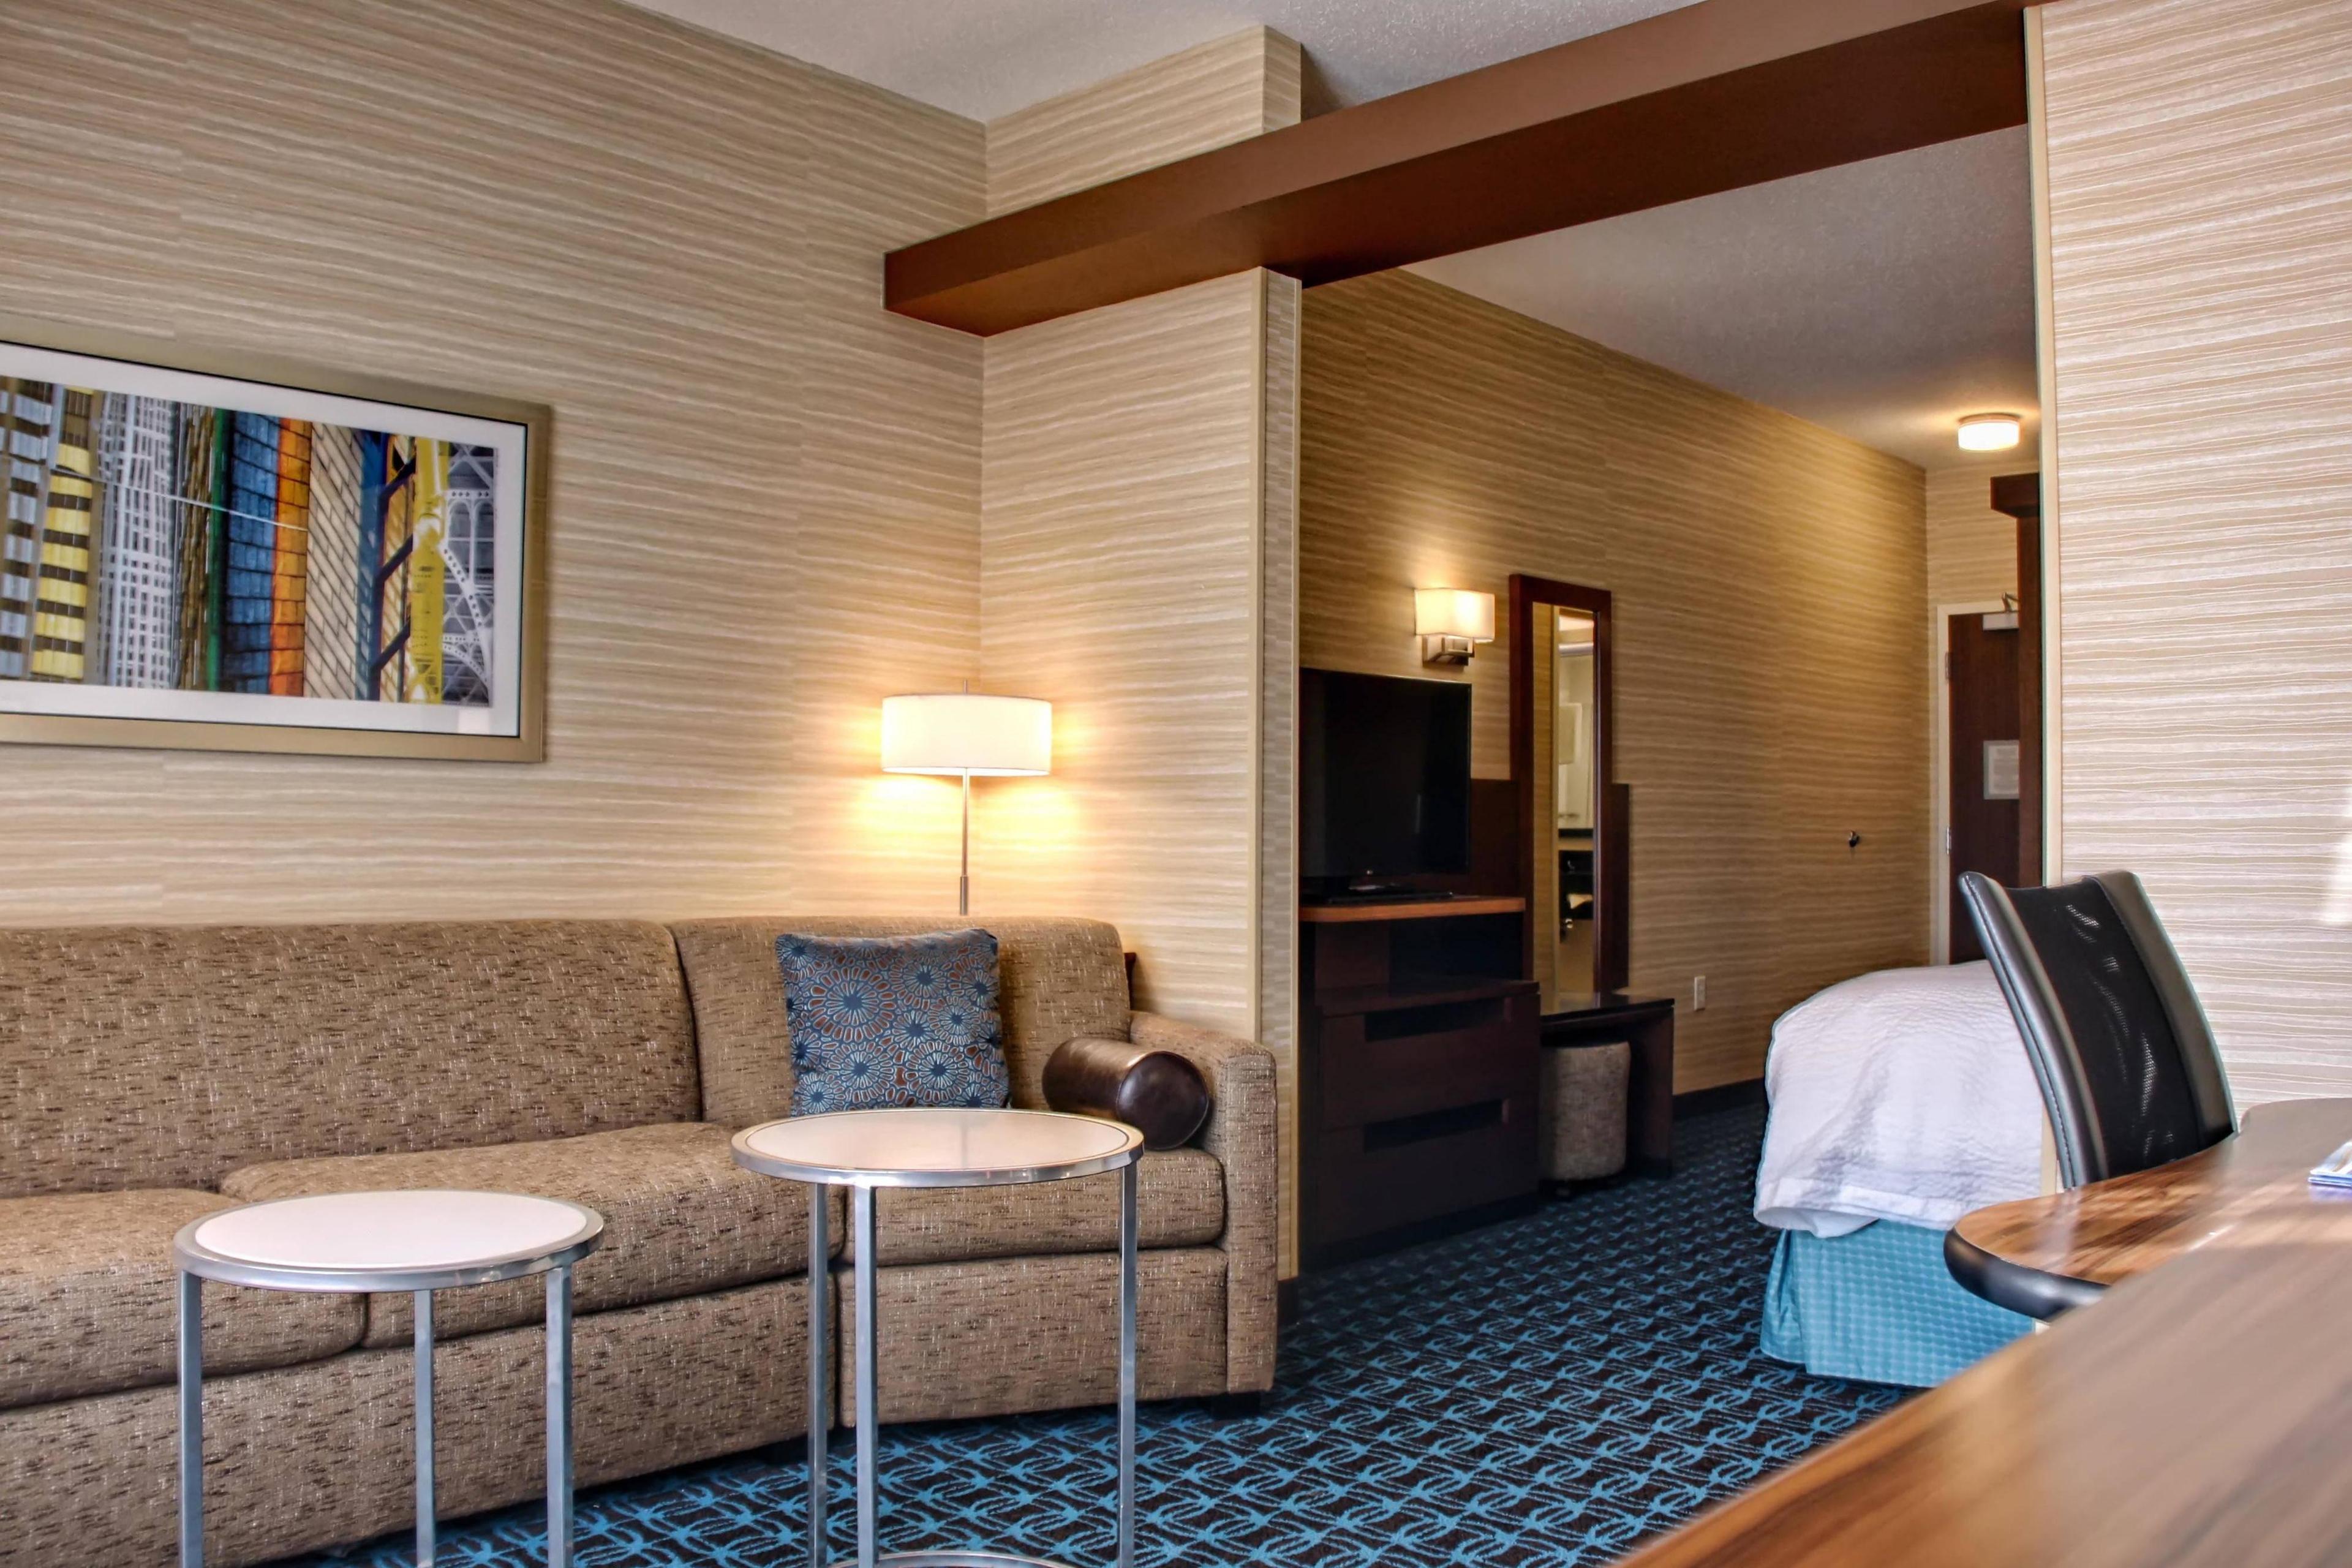 Our spacious King Suite allow you to relax and watch one of two televisions. A refrigerator and microwave are in every room for your convenience.